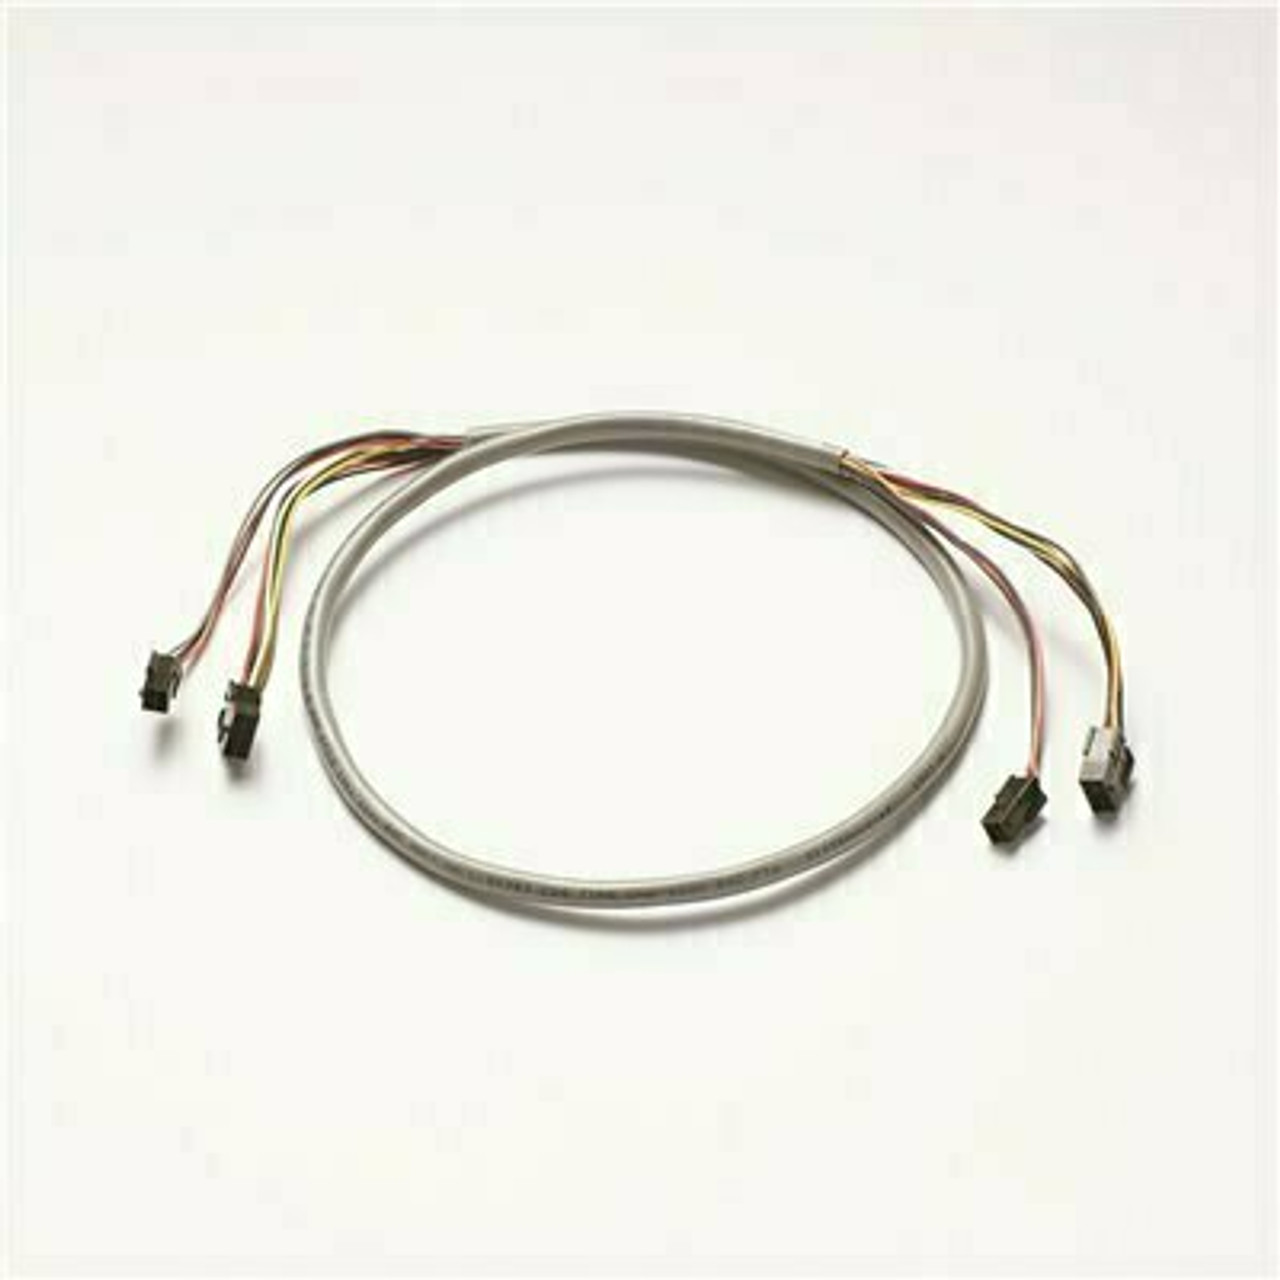 Mckinney 4.5 In. X 4.5 In. Electrolynx Cables - 307492404